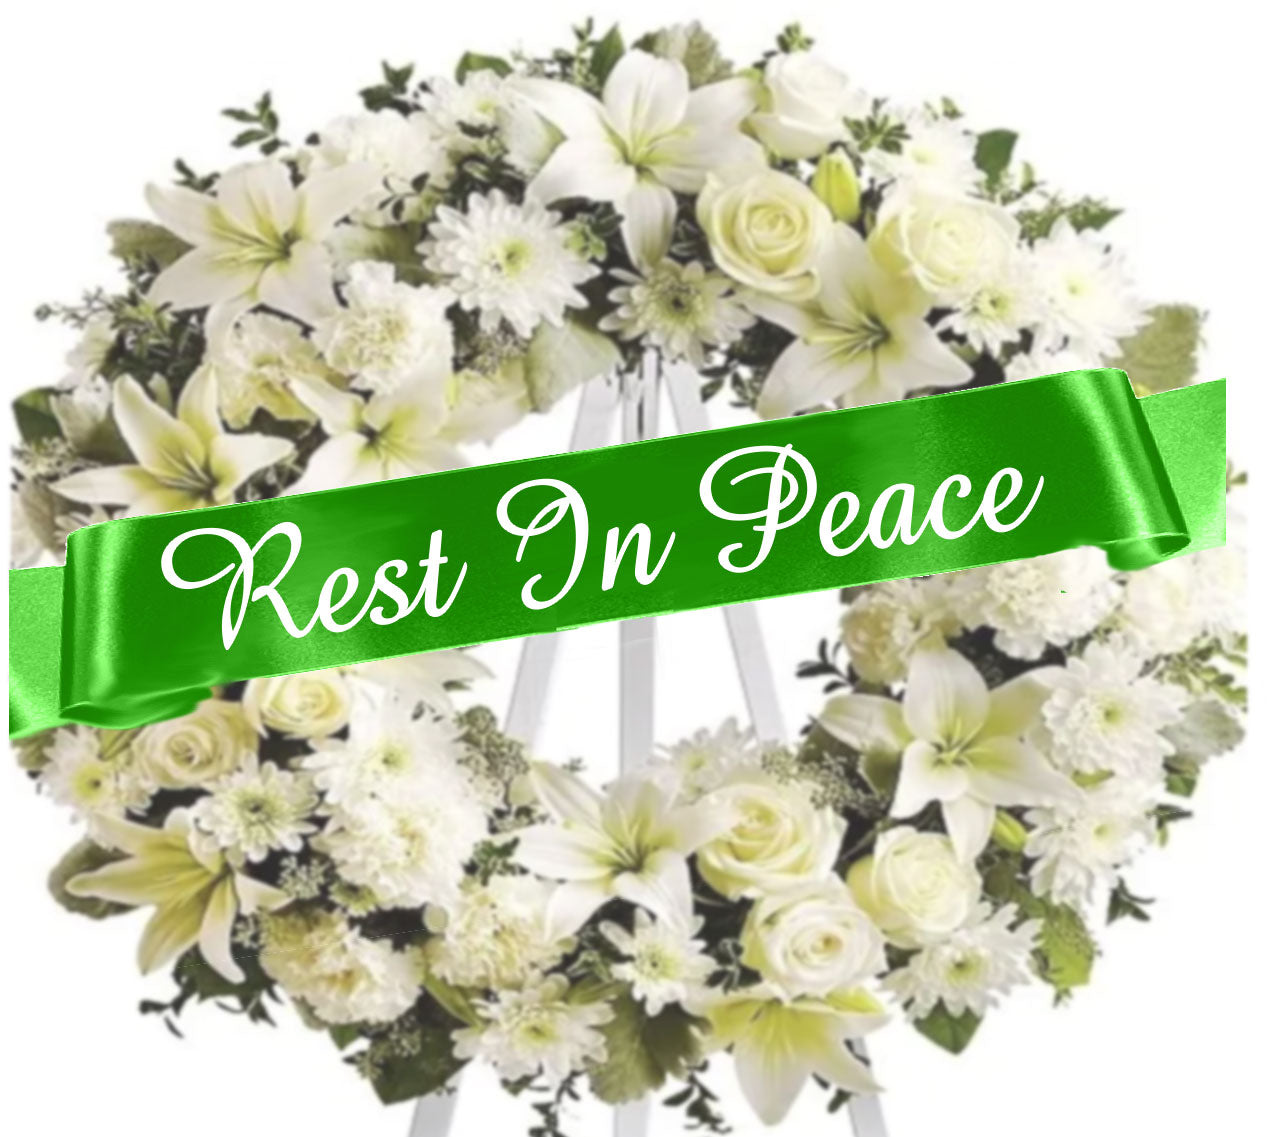 Rest In Peace Funeral Flowers Ribbon Banner.